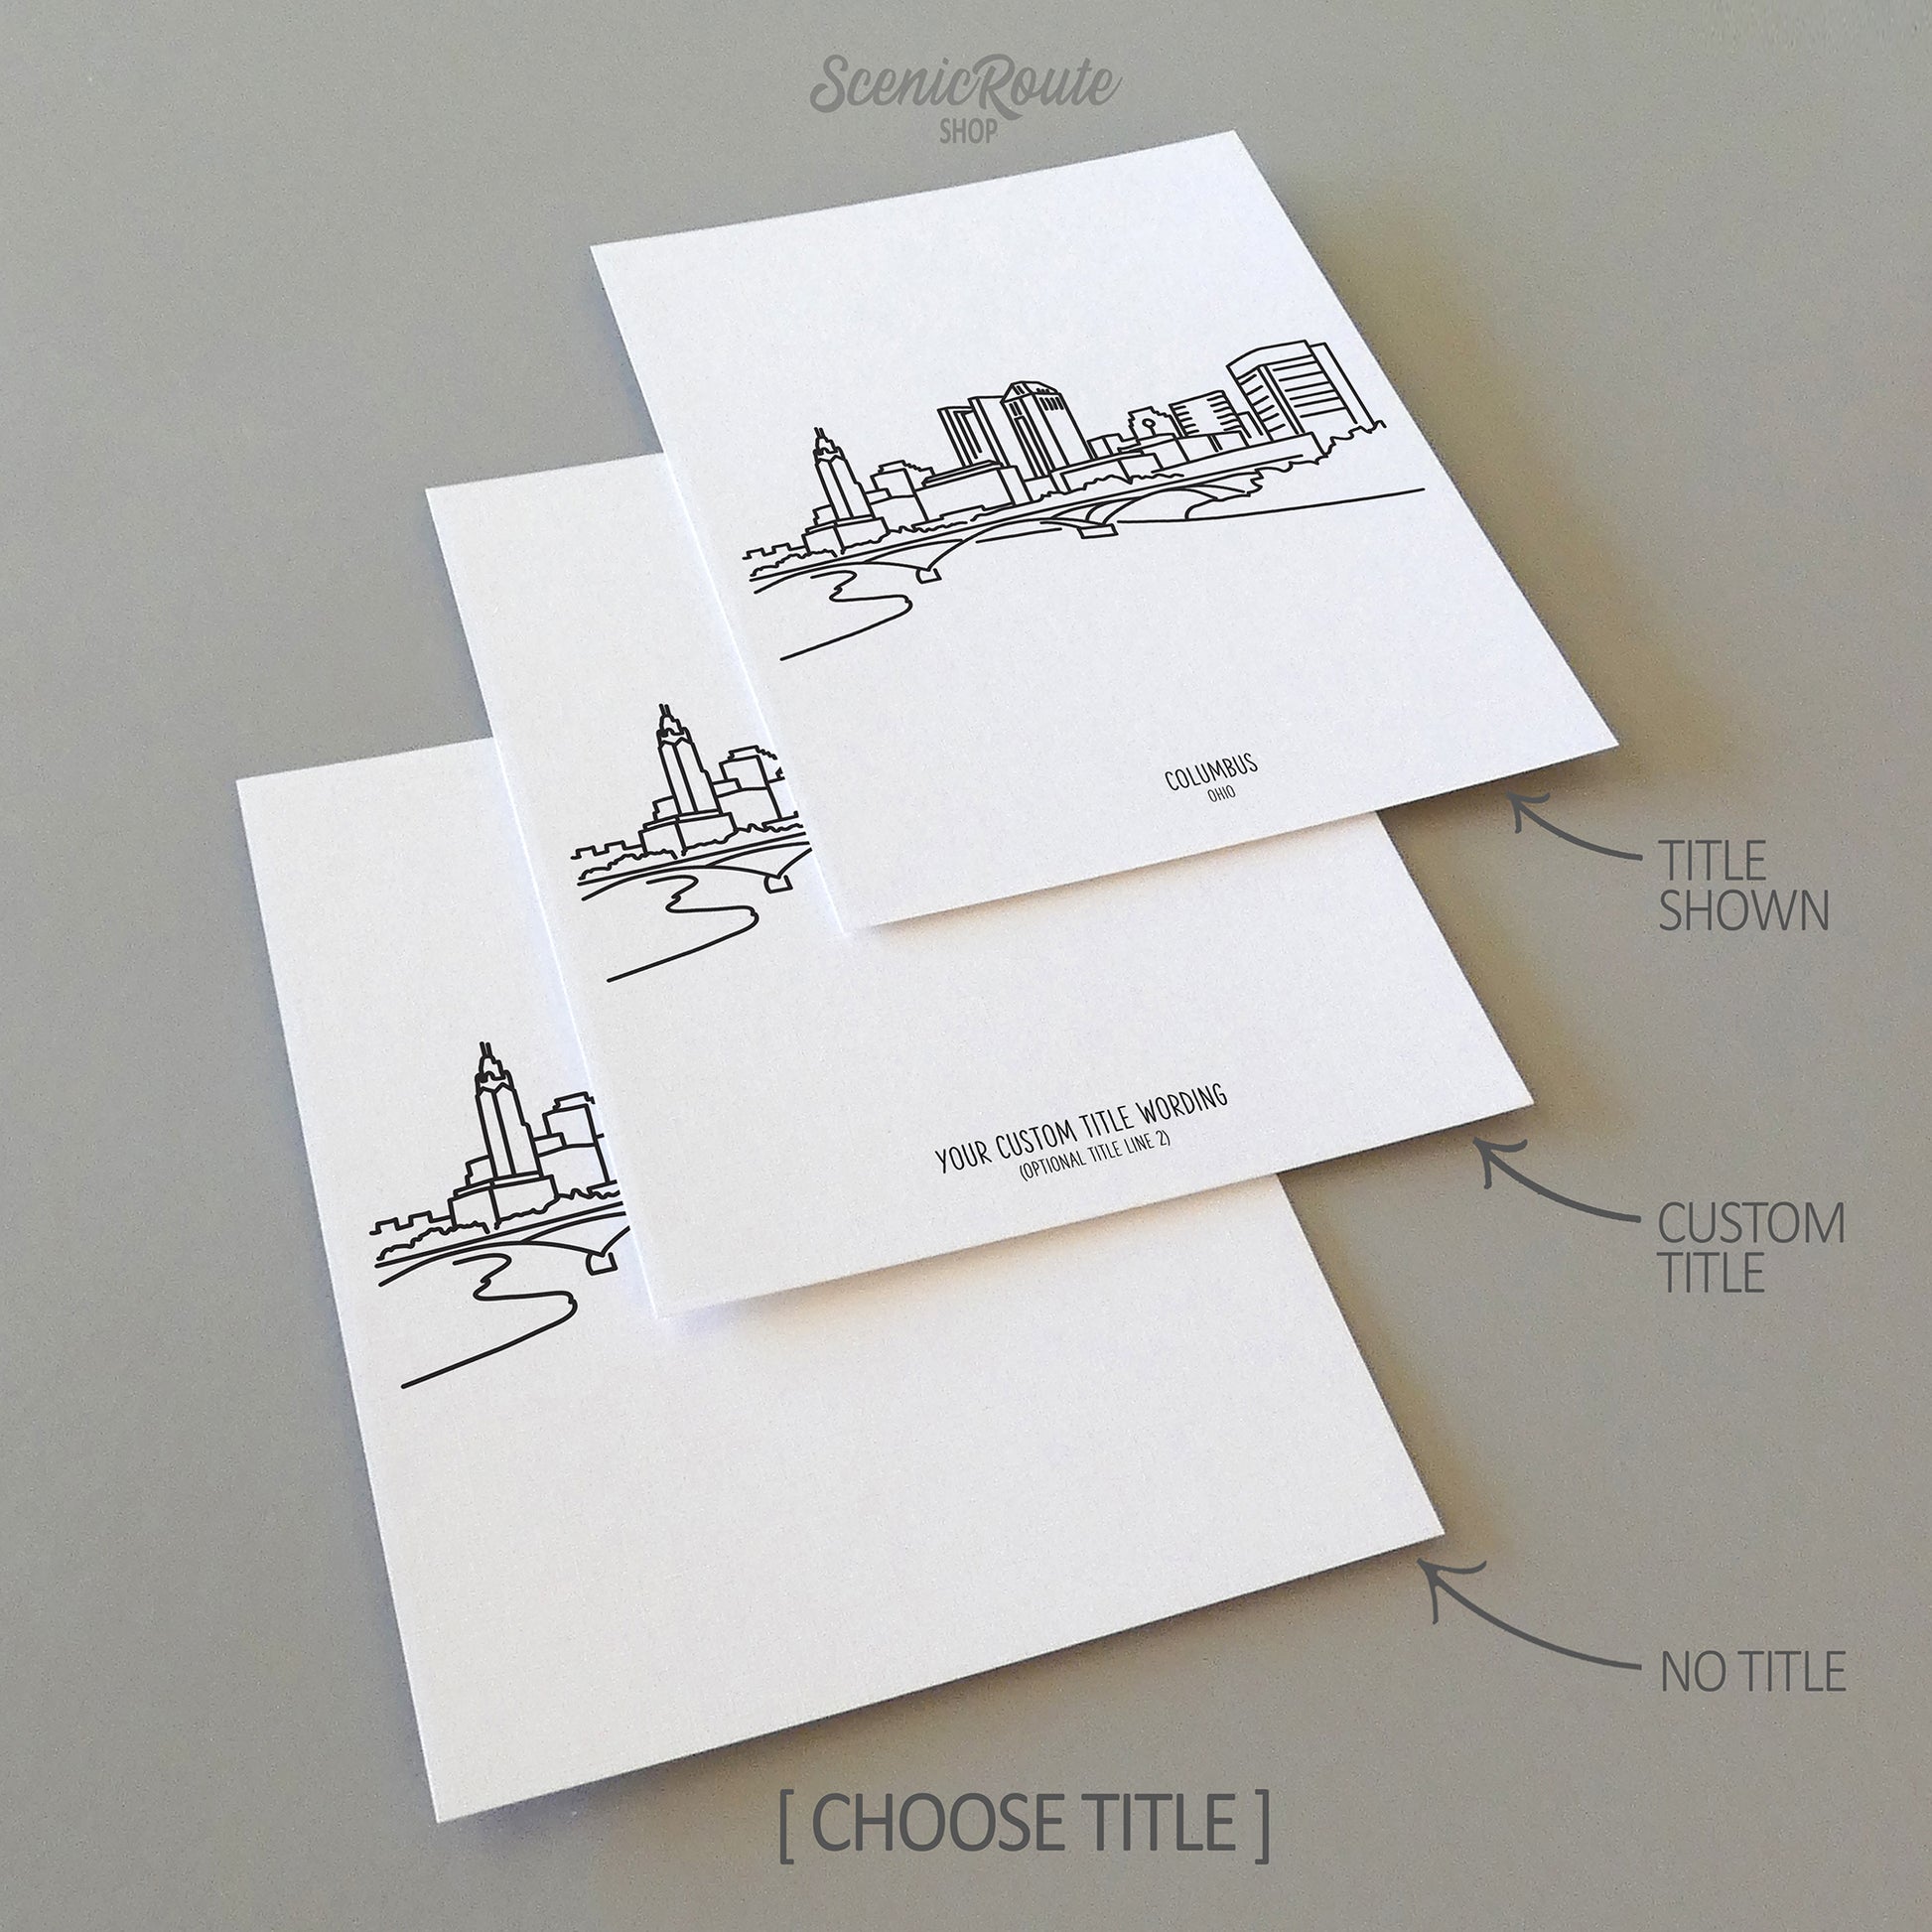 Three line art drawings of the Columbus Ohio Skyline on white linen paper with a gray background. The pieces are shown with title options that can be chosen and personalized.